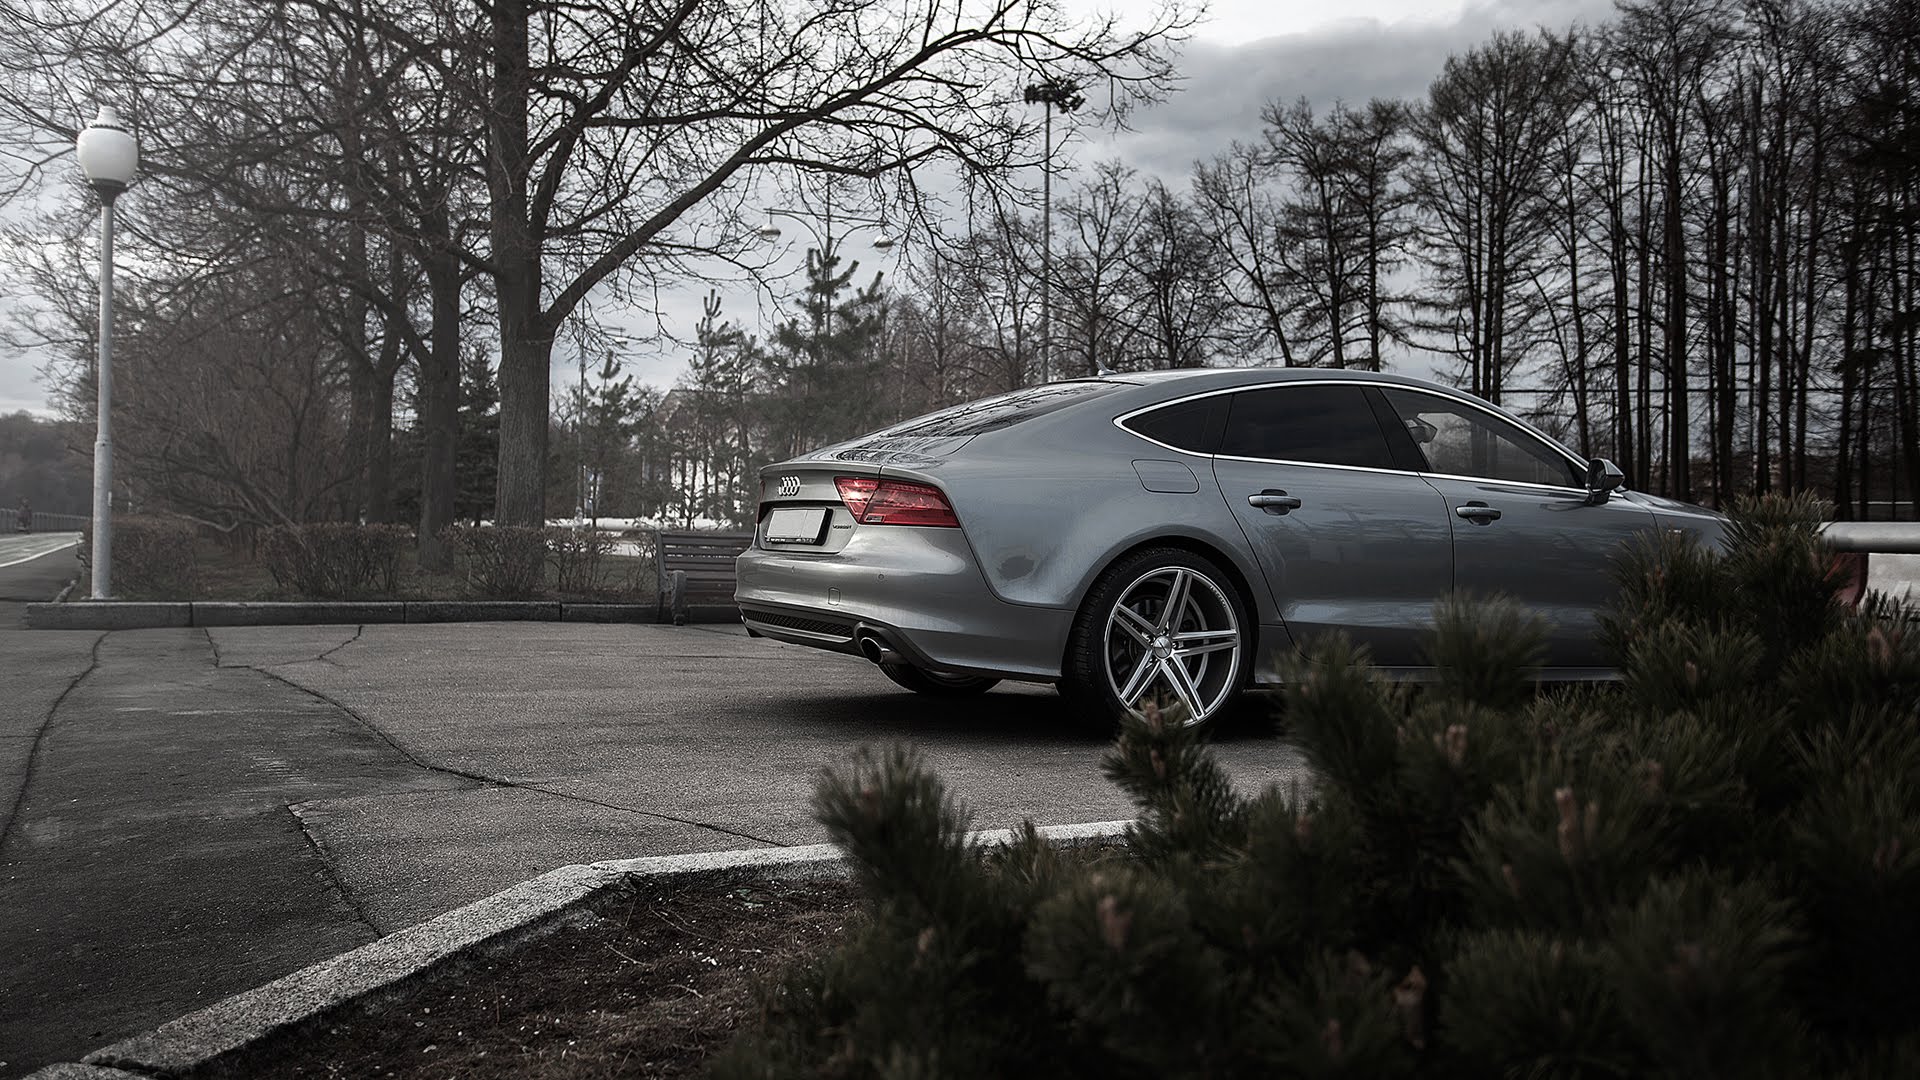 Audi A7 Wallpaper HD Photo, Wallpaper and other Image